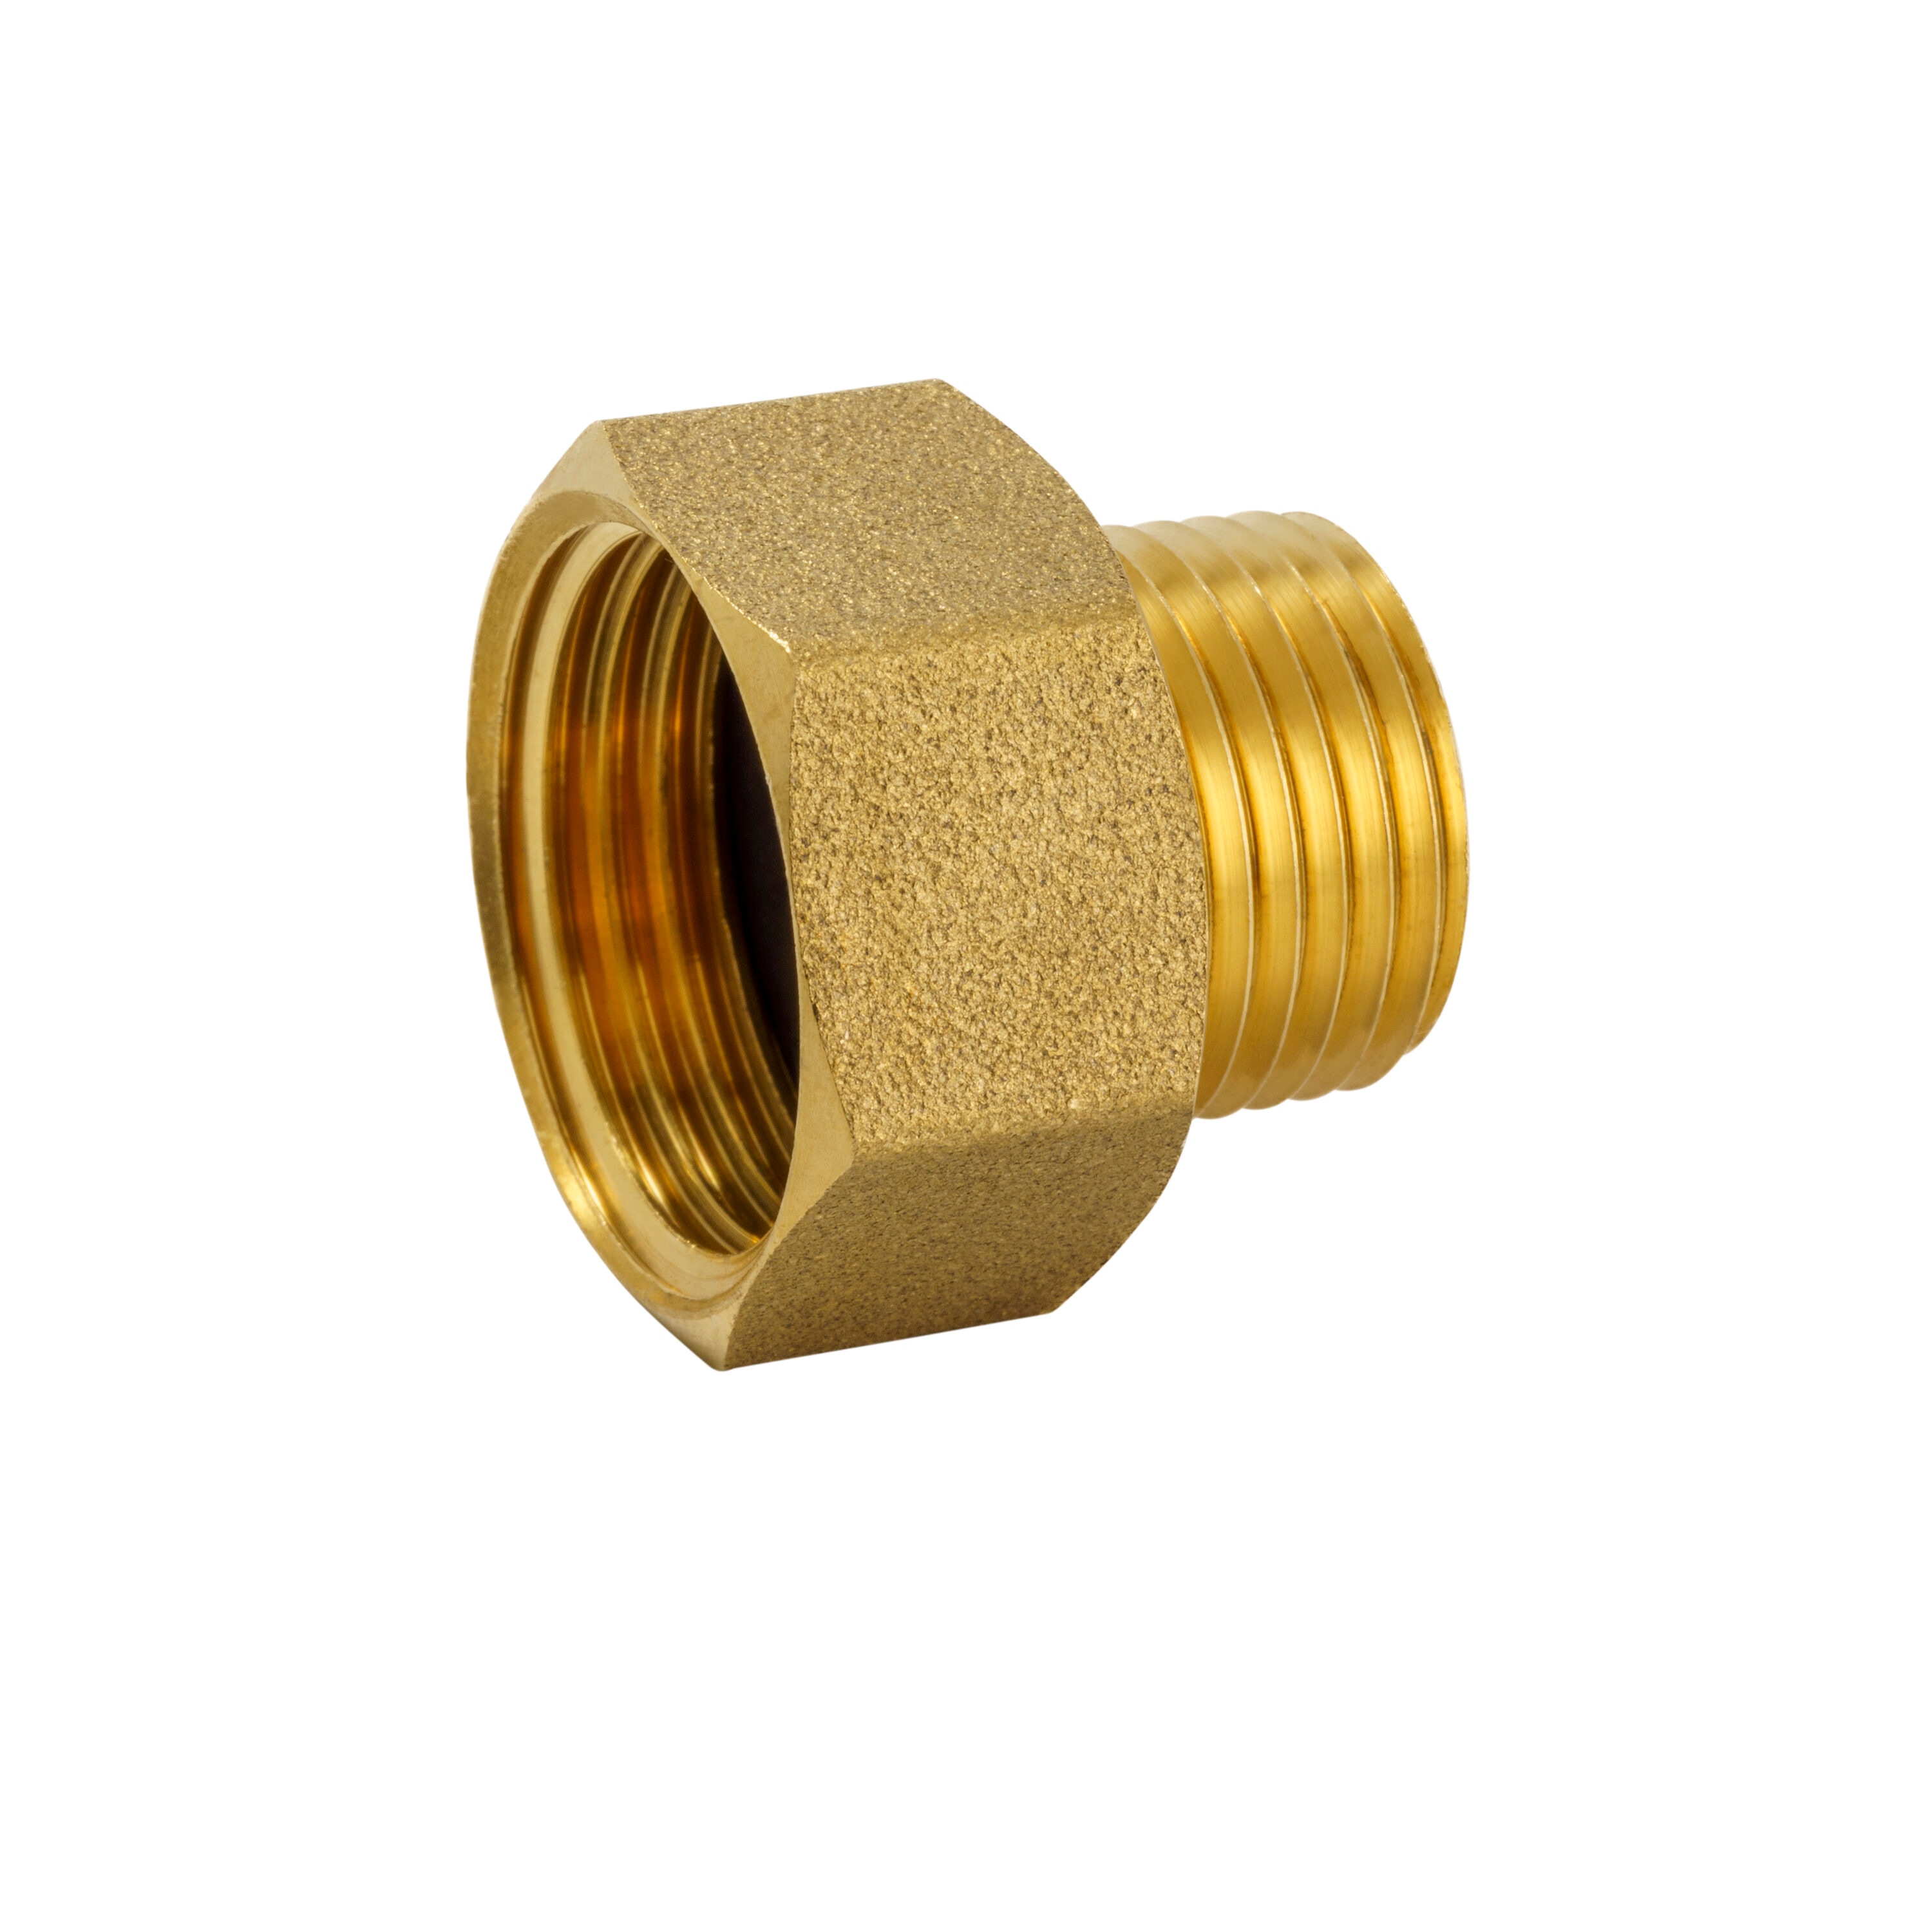 B&K 3/4-in Threaded Female Hose x MIP Adapter Fitting Rubber in Gold | GH-677B